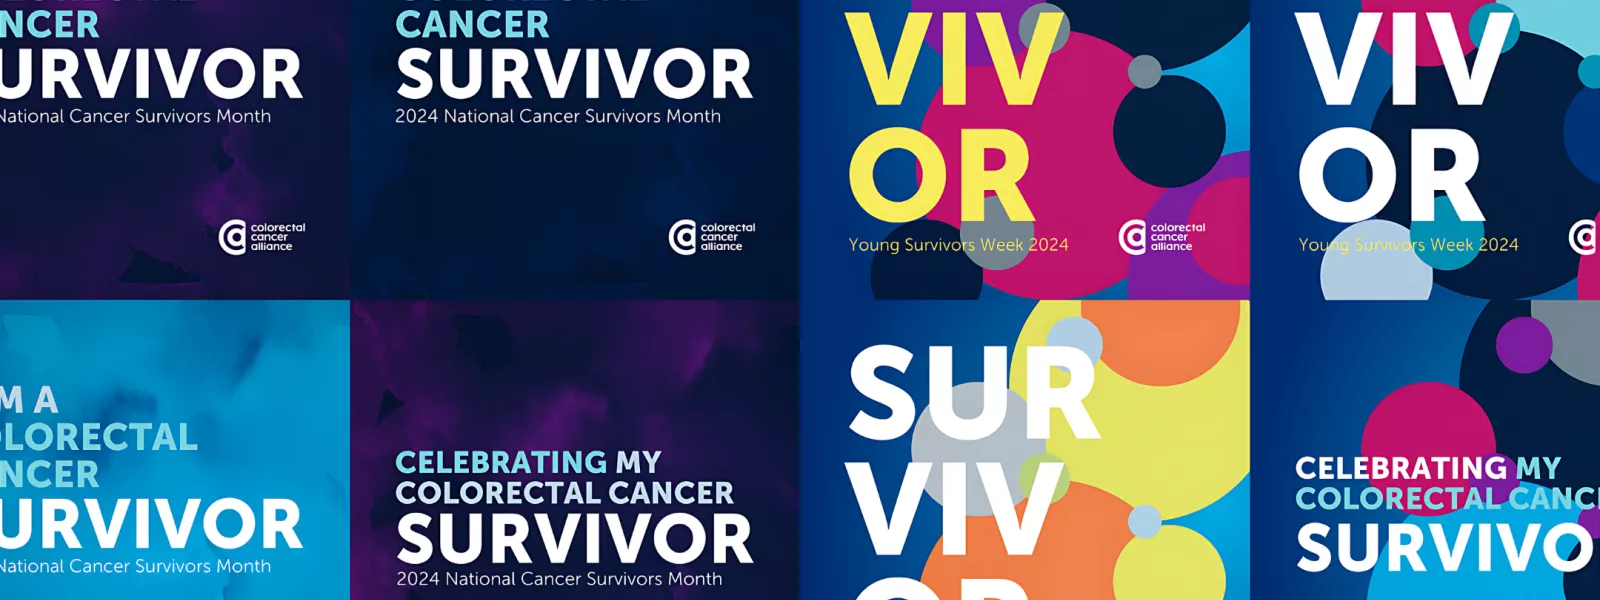 Social media posts for Survivors Month and Young Survivors Week 2024.